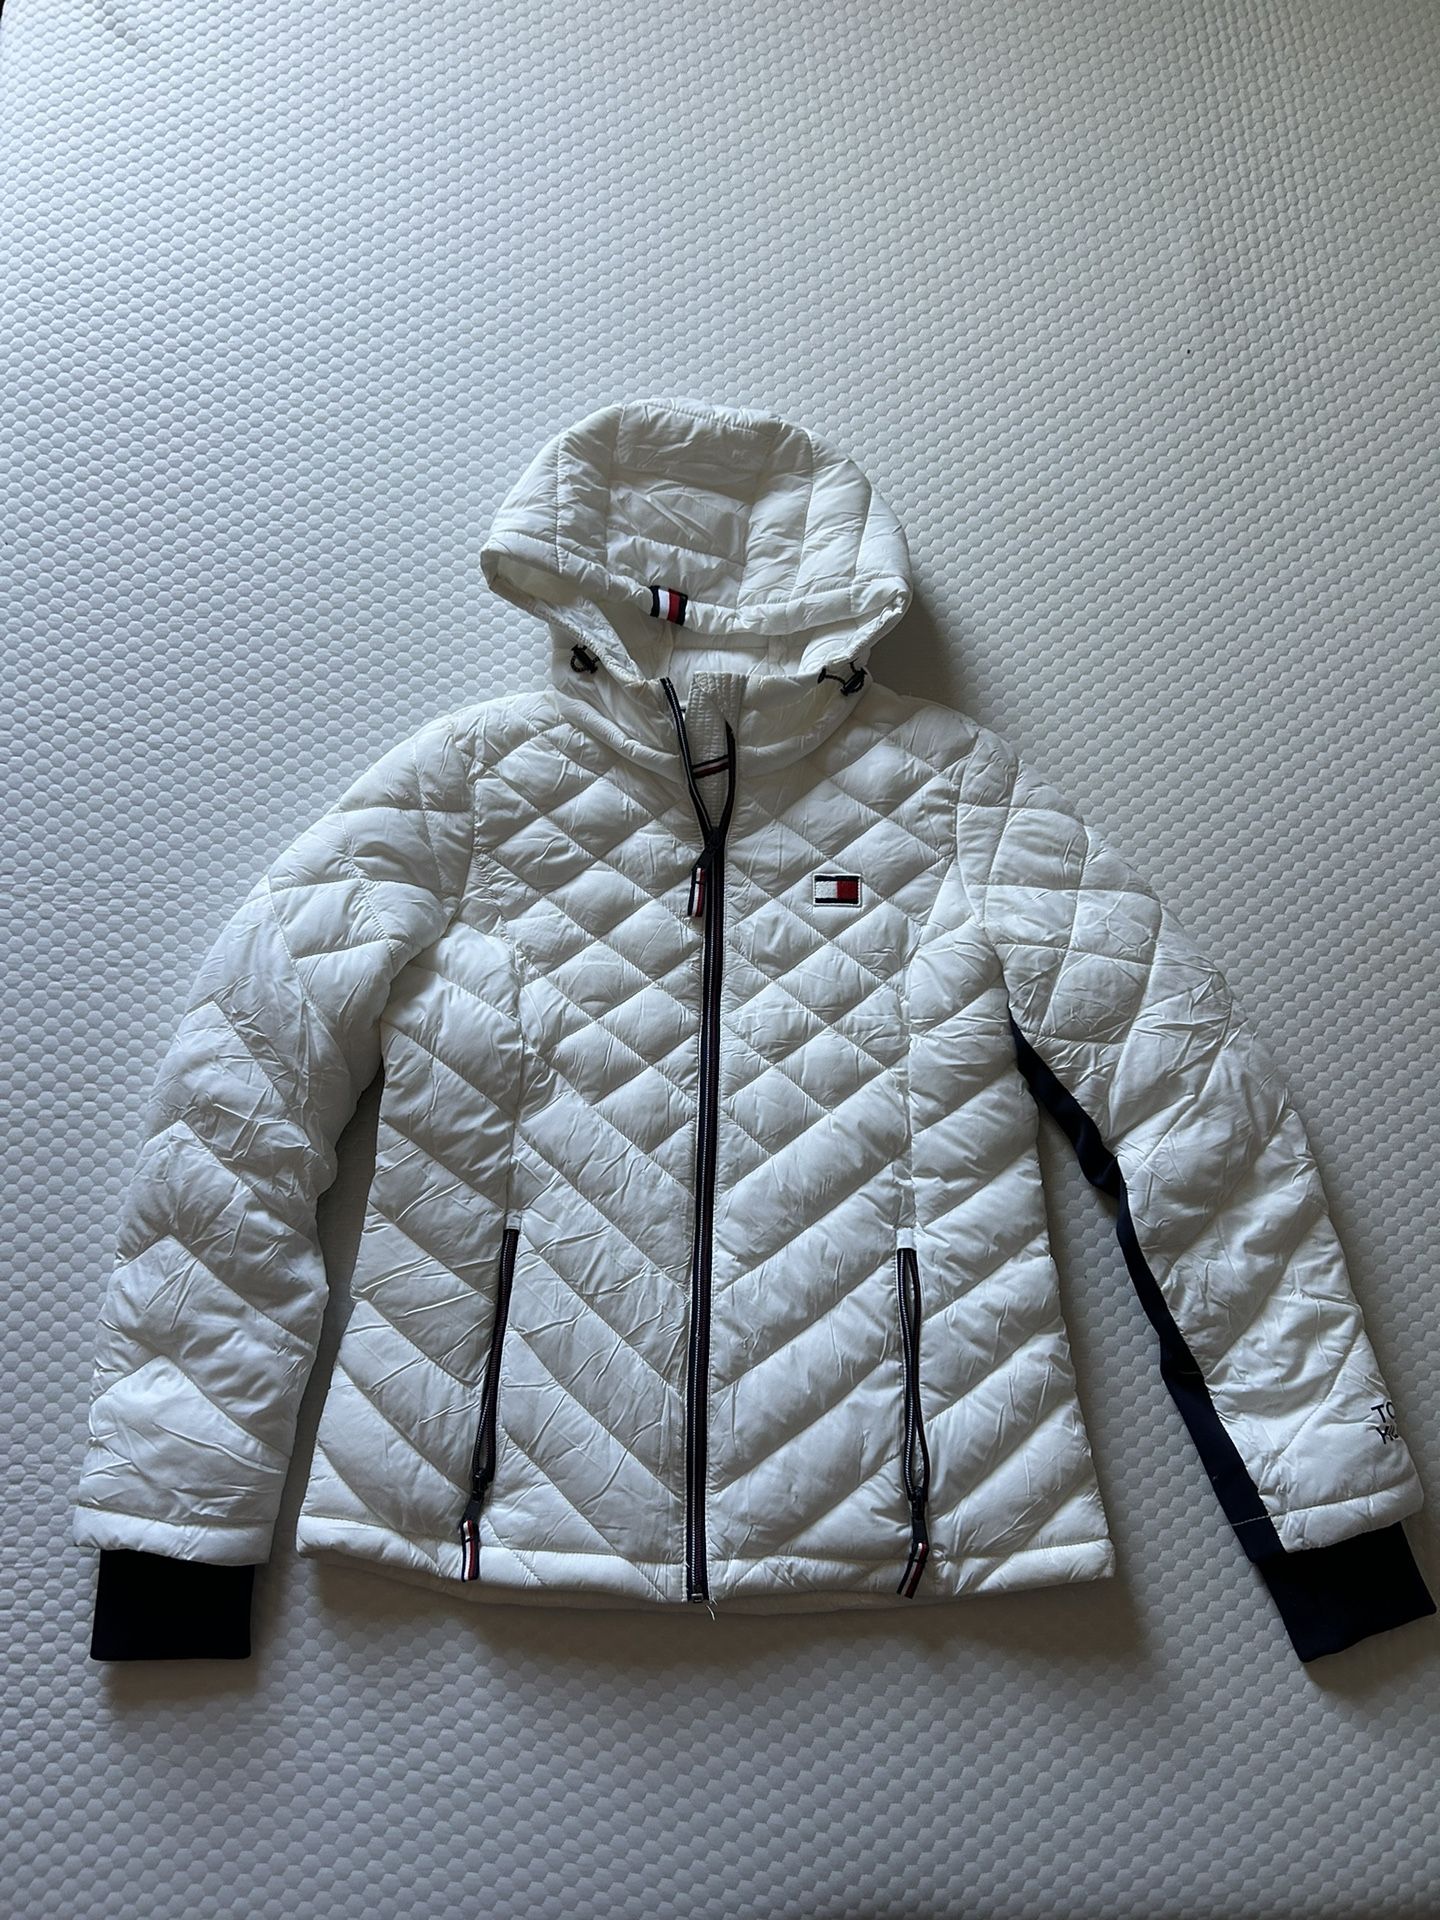 Tommy Hilfiger Women’s Hooded Puffer Jacket Size Small